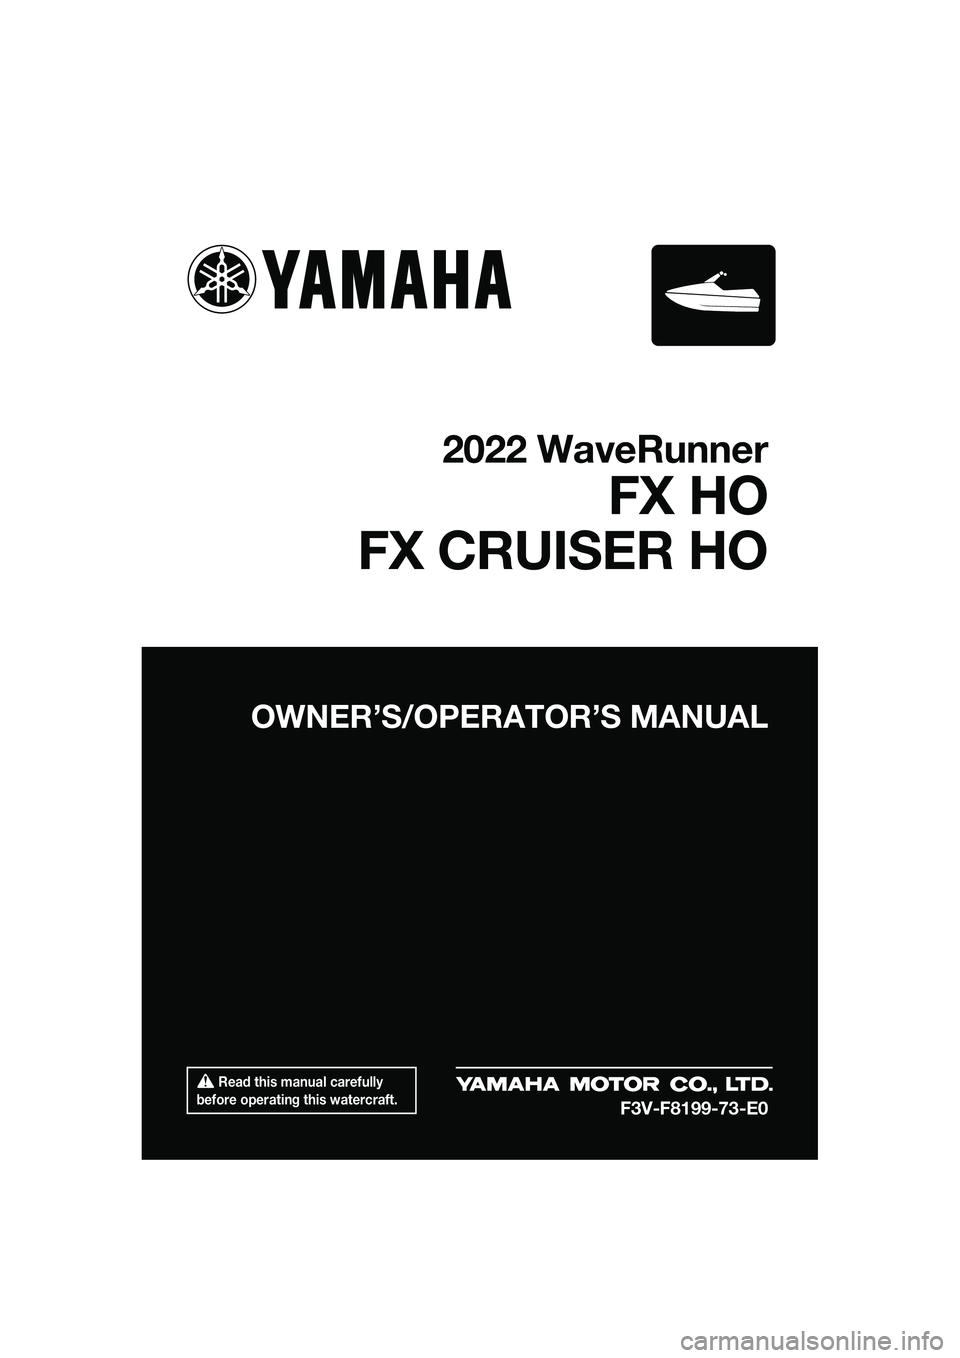 YAMAHA FX HO CRUISER 2022  Owners Manual  Read this manual carefully 
before operating this watercraft.
OWNER’S/OPERAT OR’S MANUAL
2022 WaveRunner
FX HO
FX CRUISER HO
F3V-F8199-73-E0
UF3V73E0.book  Page 1  Friday, October 8, 2021  1:30 P